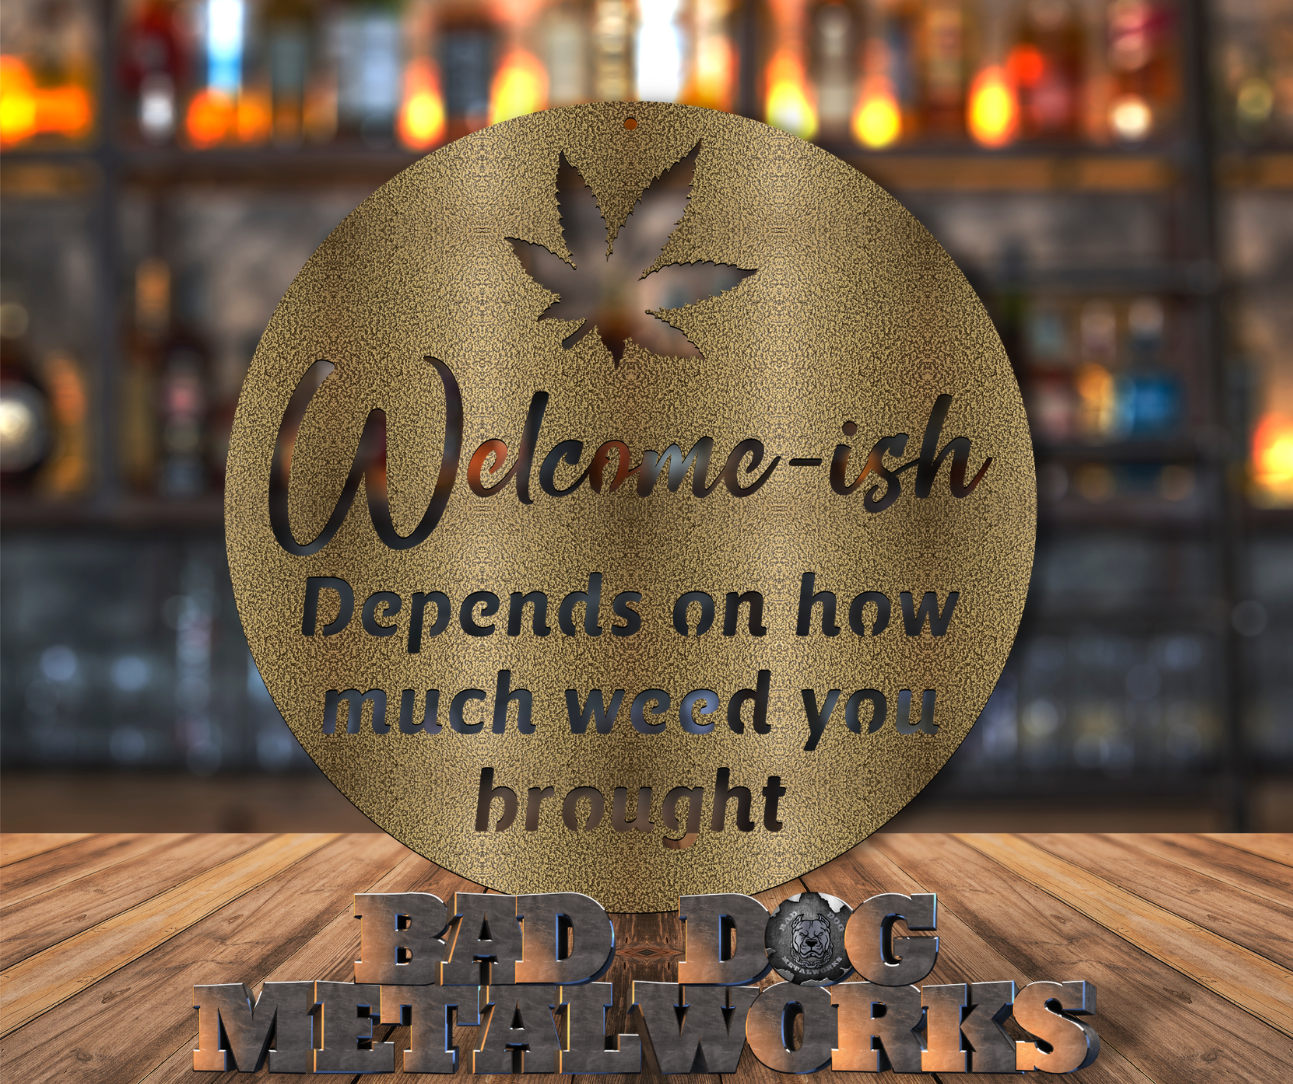 Welcome'ish Depends on How Much Weed You Brought